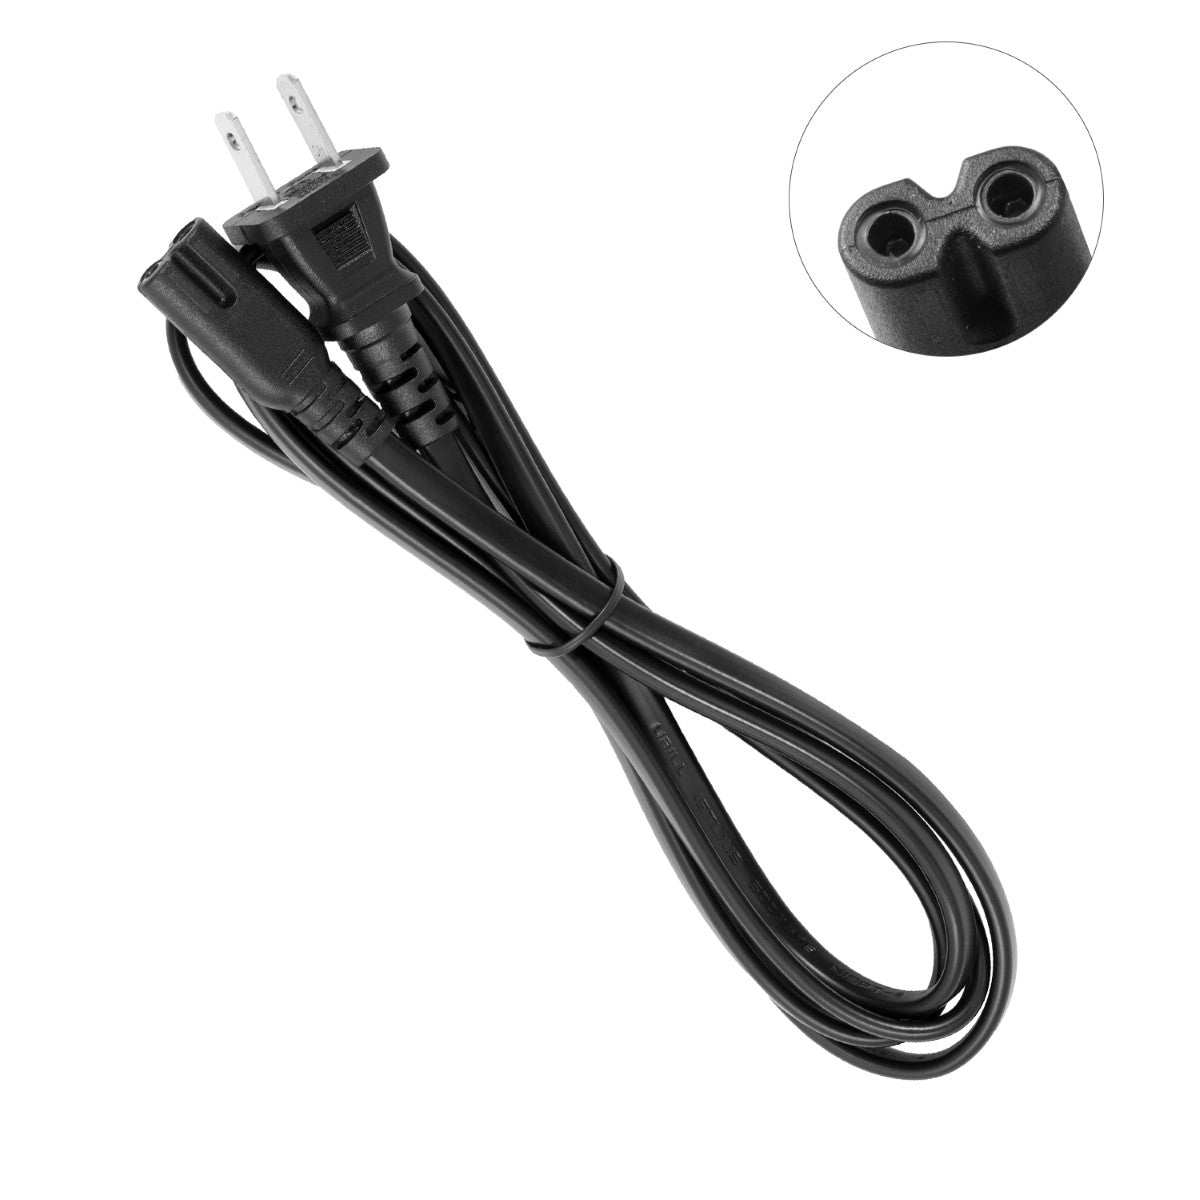 Power Cord for HP ENVY 5661 e-All-in-One Printer.